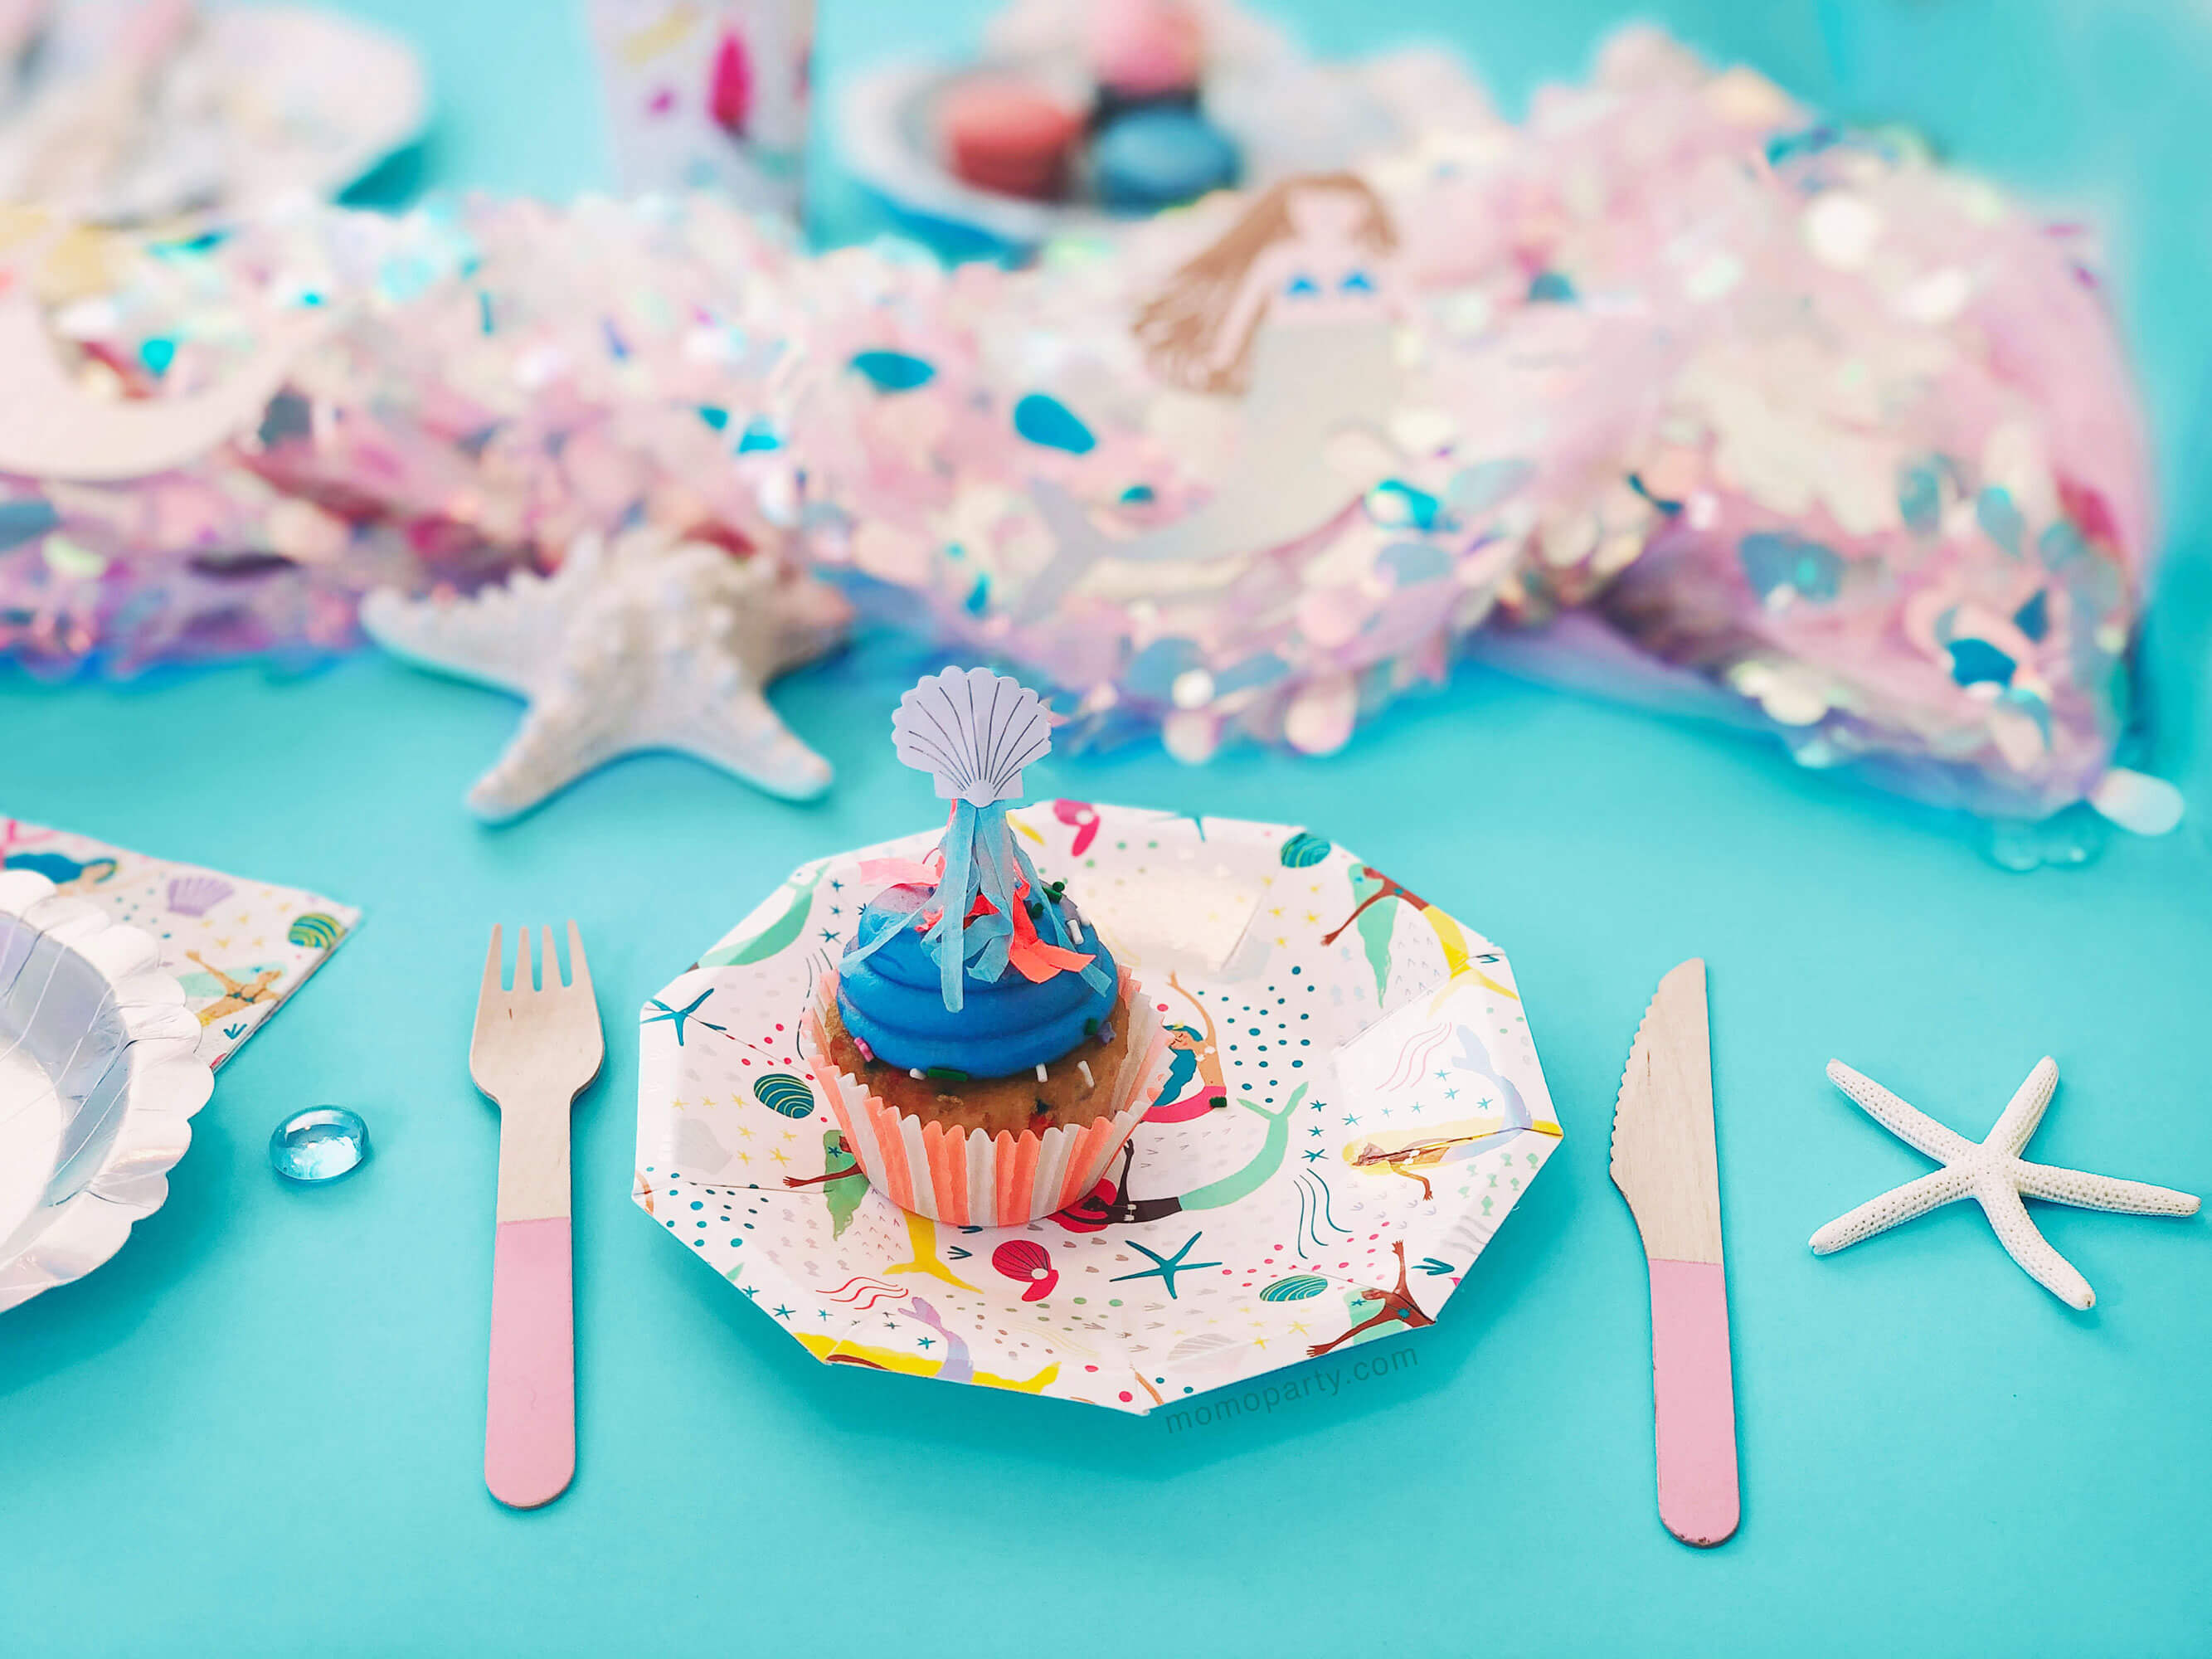 Mermaid themed party Table Set up close up look with cupcake on mermaid plates with pink wooden curlery